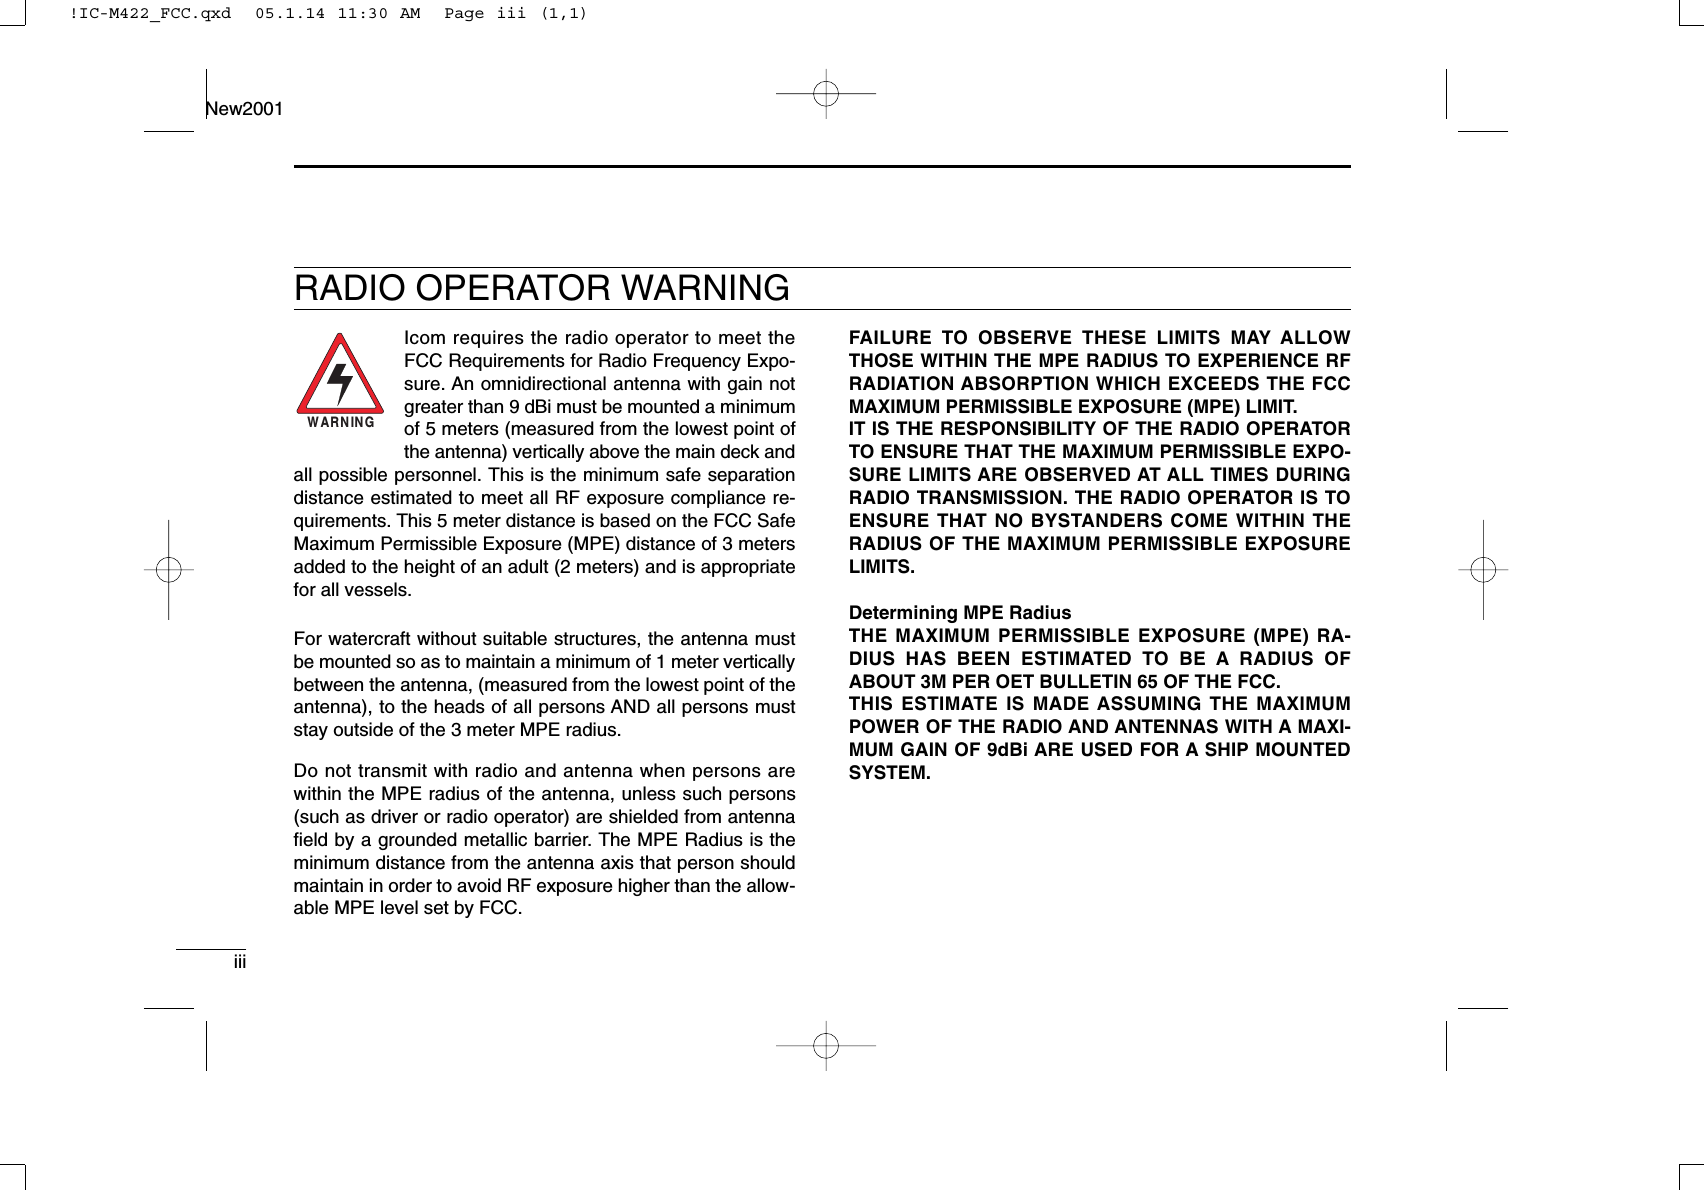 iiiNew2001RADIO OPERATOR WARNINGIcom requires the radio operator to meet theFCC Requirements for Radio Frequency Expo-sure. An omnidirectional antenna with gain notgreater than 9 dBi must be mounted a minimumof 5 meters (measured from the lowest point ofthe antenna) vertically above the main deck andall possible personnel. This is the minimum safe separationdistance estimated to meet all RF exposure compliance re-quirements. This 5 meter distance is based on the FCC SafeMaximum Permissible Exposure (MPE) distance of 3 metersadded to the height of an adult (2 meters) and is appropriatefor all vessels.For watercraft without suitable structures, the antenna mustbe mounted so as to maintain a minimum of 1 meter verticallybetween the antenna, (measured from the lowest point of theantenna), to the heads of all persons AND all persons muststay outside of the 3 meter MPE radius.Do not transmit with radio and antenna when persons arewithin the MPE radius of the antenna, unless such persons(such as driver or radio operator) are shielded from antennaﬁeld by a grounded metallic barrier. The MPE Radius is theminimum distance from the antenna axis that person shouldmaintain in order to avoid RF exposure higher than the allow-able MPE level set by FCC.WARNINGFAILURE TO OBSERVE THESE LIMITS MAY ALLOWTHOSE WITHIN THE MPE RADIUS TO EXPERIENCE RFRADIATION ABSORPTION WHICH EXCEEDS THE FCCMAXIMUM PERMISSIBLE EXPOSURE (MPE) LIMIT.IT IS THE RESPONSIBILITY OF THE RADIO OPERATORTO ENSURE THAT THE MAXIMUM PERMISSIBLE EXPO-SURE LIMITS ARE OBSERVED AT ALL TIMES DURINGRADIO TRANSMISSION. THE RADIO OPERATOR IS TOENSURE THAT NO BYSTANDERS COME WITHIN THERADIUS OF THE MAXIMUM PERMISSIBLE EXPOSURELIMITS.Determining MPE RadiusTHE MAXIMUM PERMISSIBLE EXPOSURE (MPE) RA-DIUS HAS BEEN ESTIMATED TO BE A RADIUS OFABOUT 3M PER OET BULLETIN 65 OF THE FCC.THIS ESTIMATE IS MADE ASSUMING THE MAXIMUMPOWER OF THE RADIO AND ANTENNAS WITH A MAXI-MUM GAIN OF 9dBi ARE USED FOR A SHIP MOUNTEDSYSTEM.!IC-M422_FCC.qxd  05.1.14 11:30 AM  Page iii (1,1)